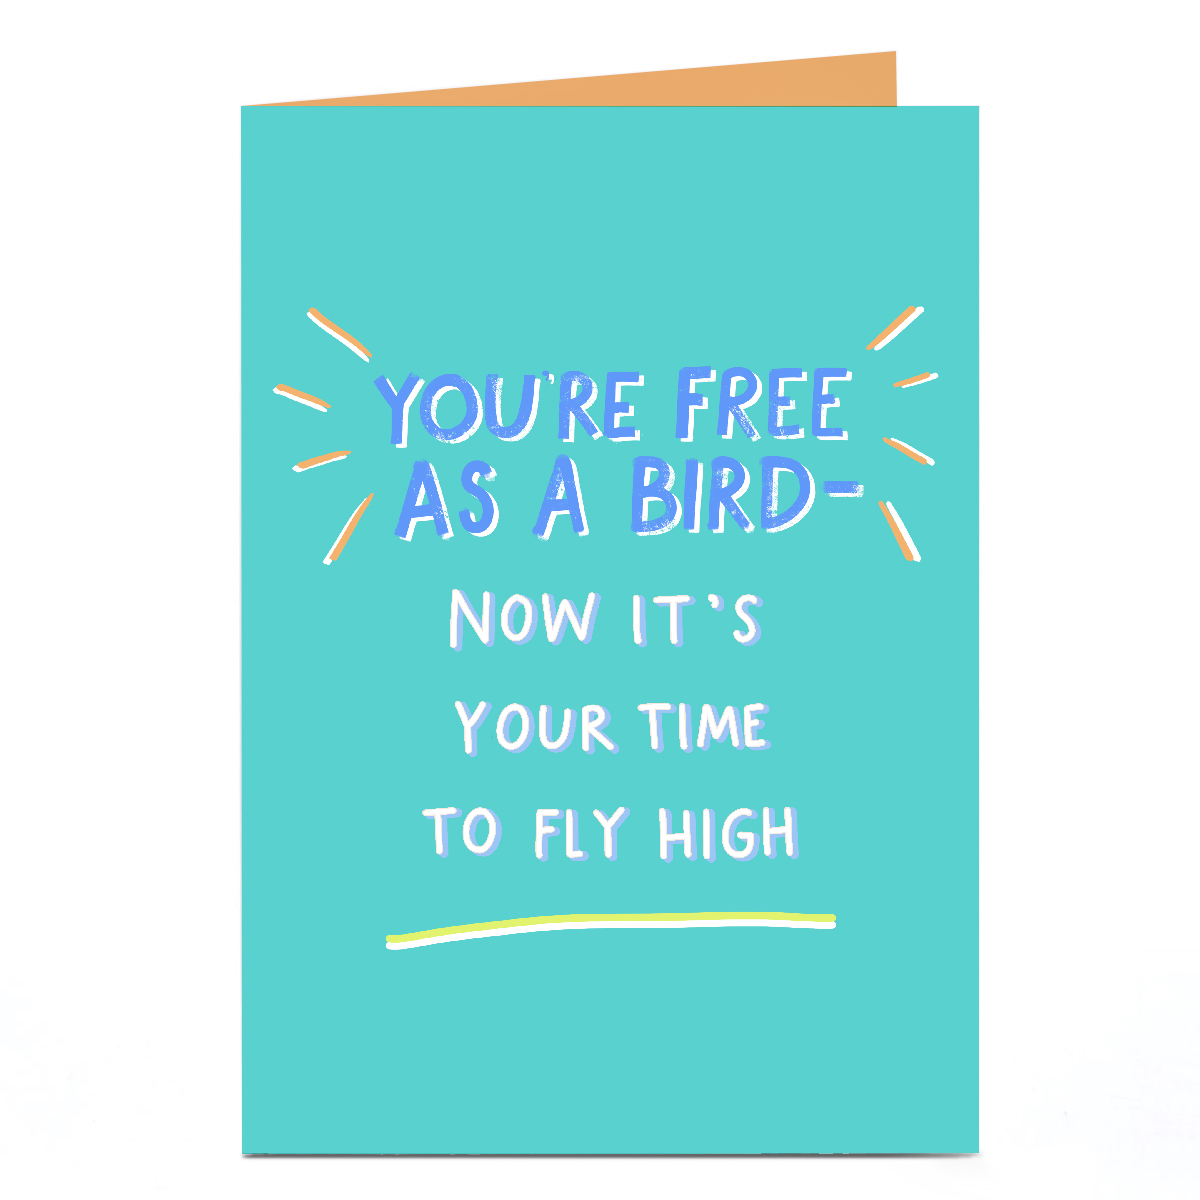 Personalised Thinking of You Card - You're Free as a Bird